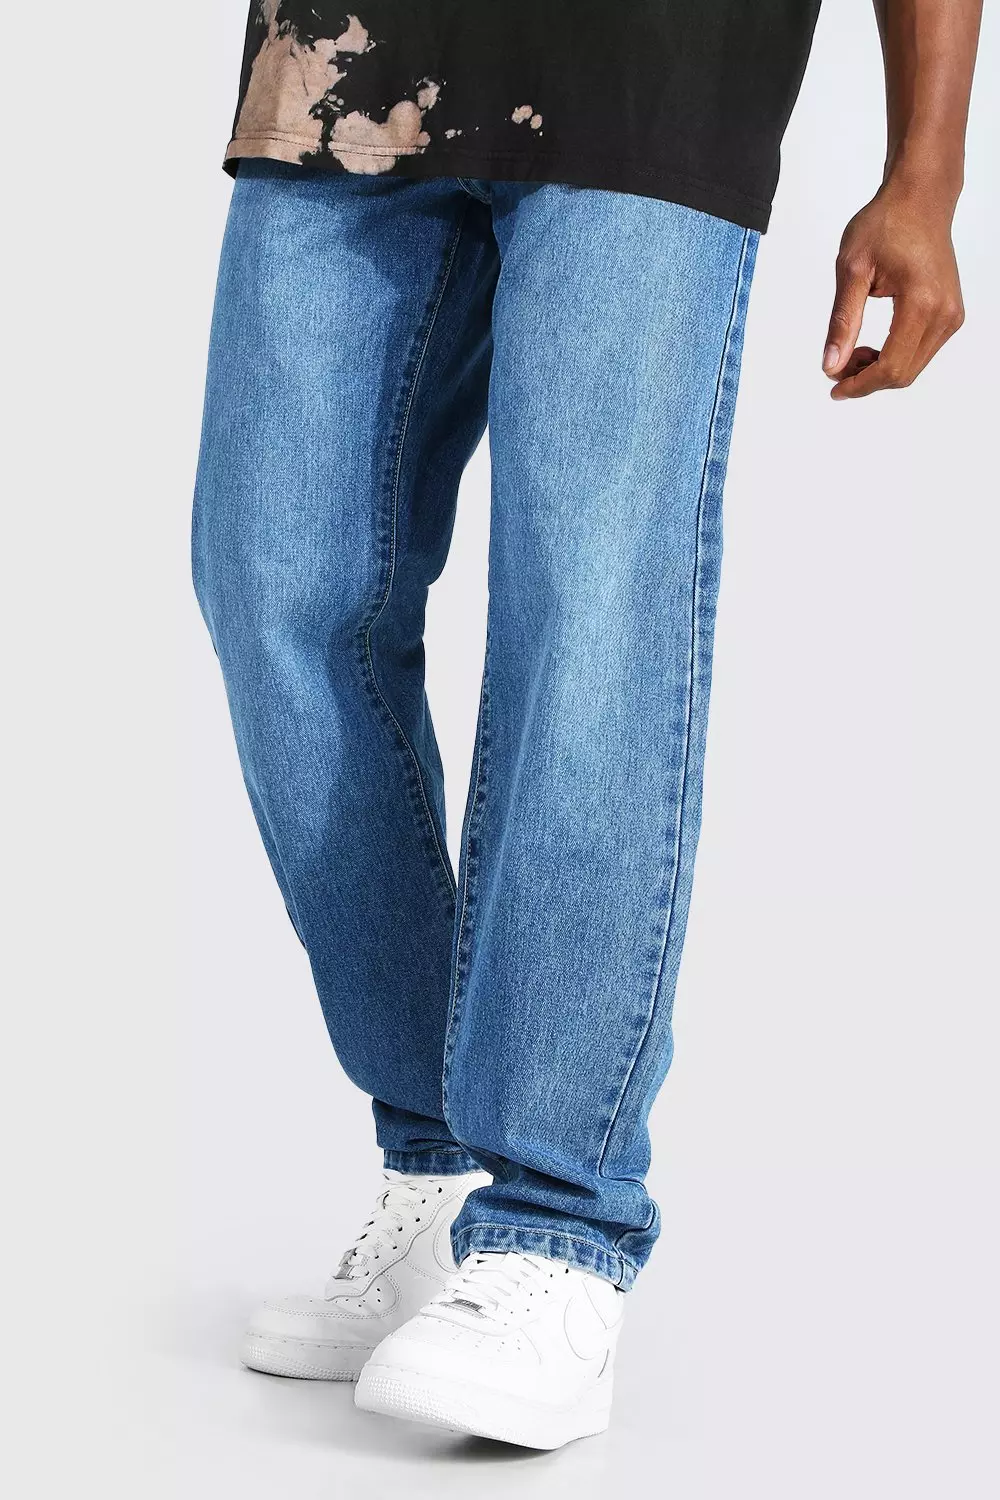 boohooMAN Men's Relaxed Fit Diamond Jacquard Jeans